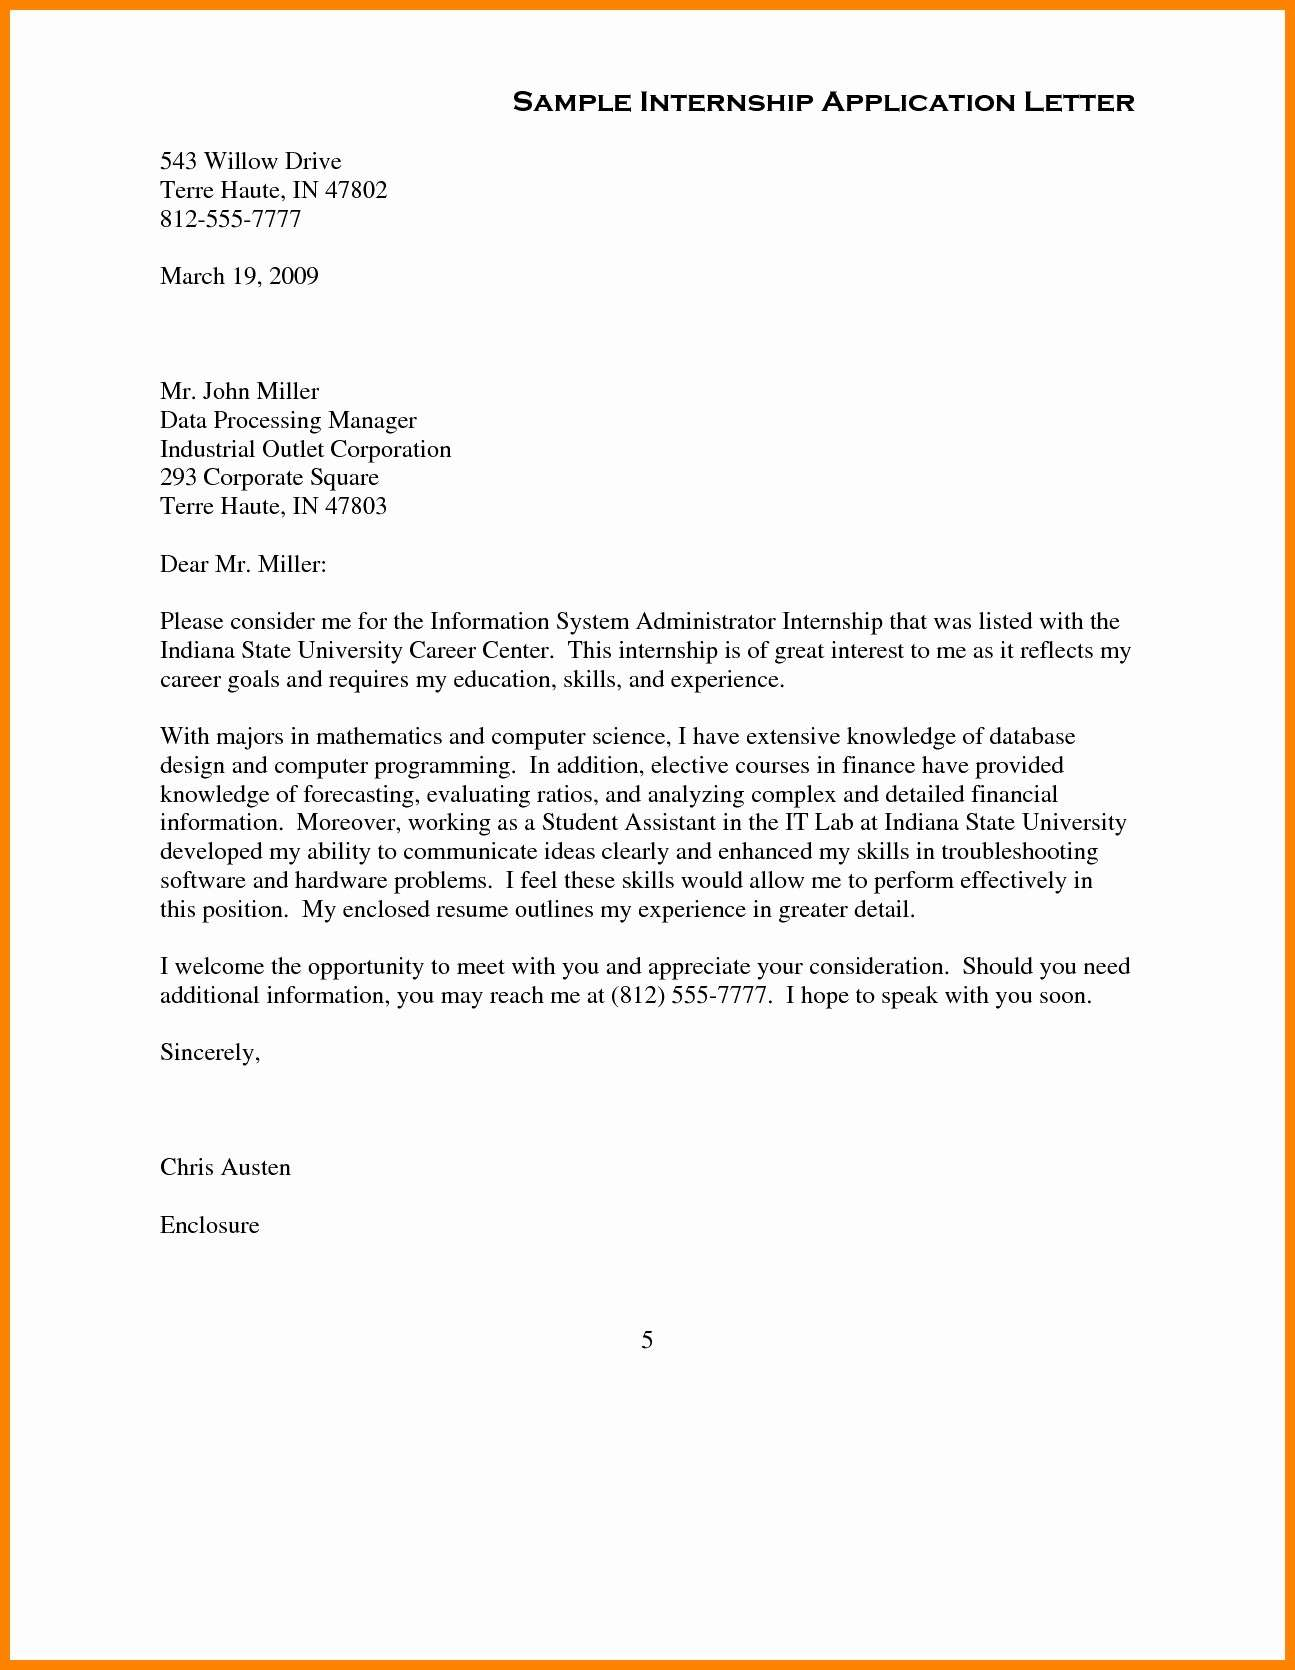 Job Letter Template - Template Cover Letter New Cover Letter Examples for Internship